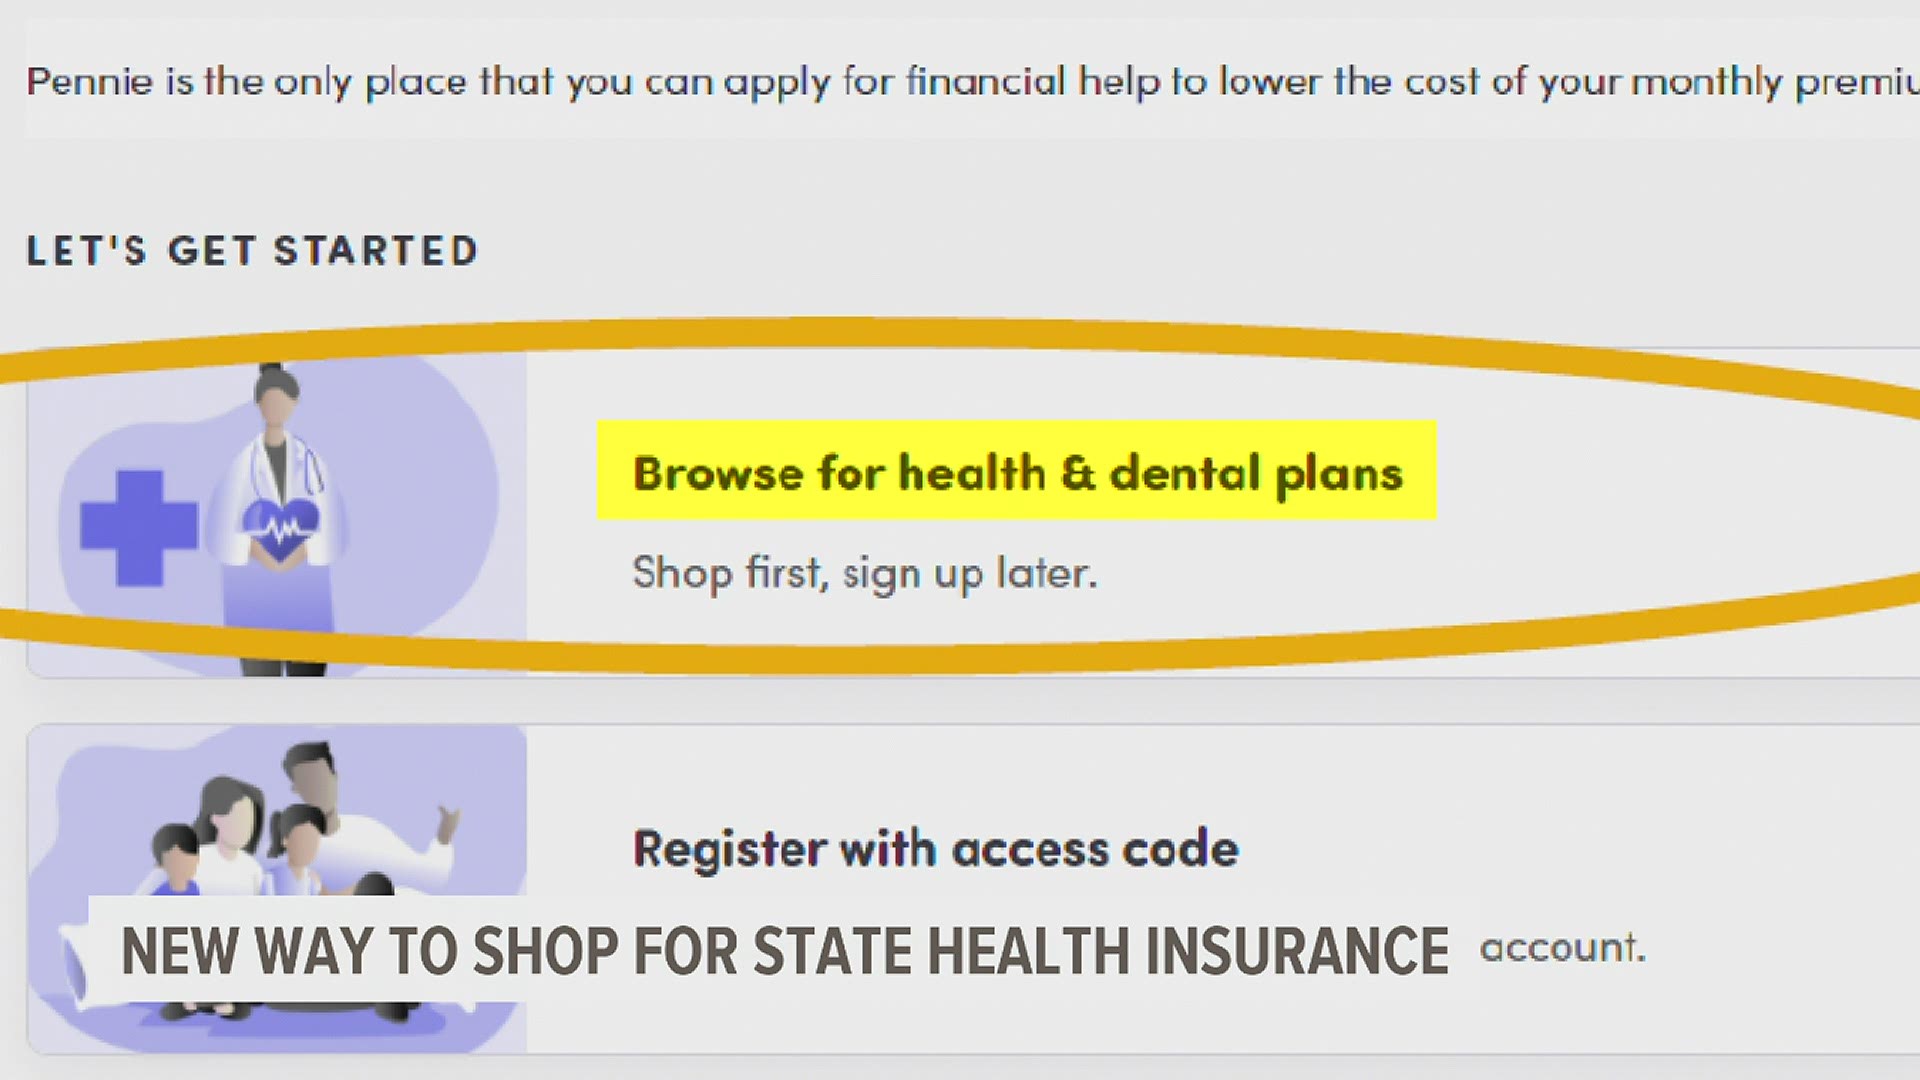 Open enrollment begins November 1st, and Pennsylvanians looking to shop for health insurance through the state will have to use a new website